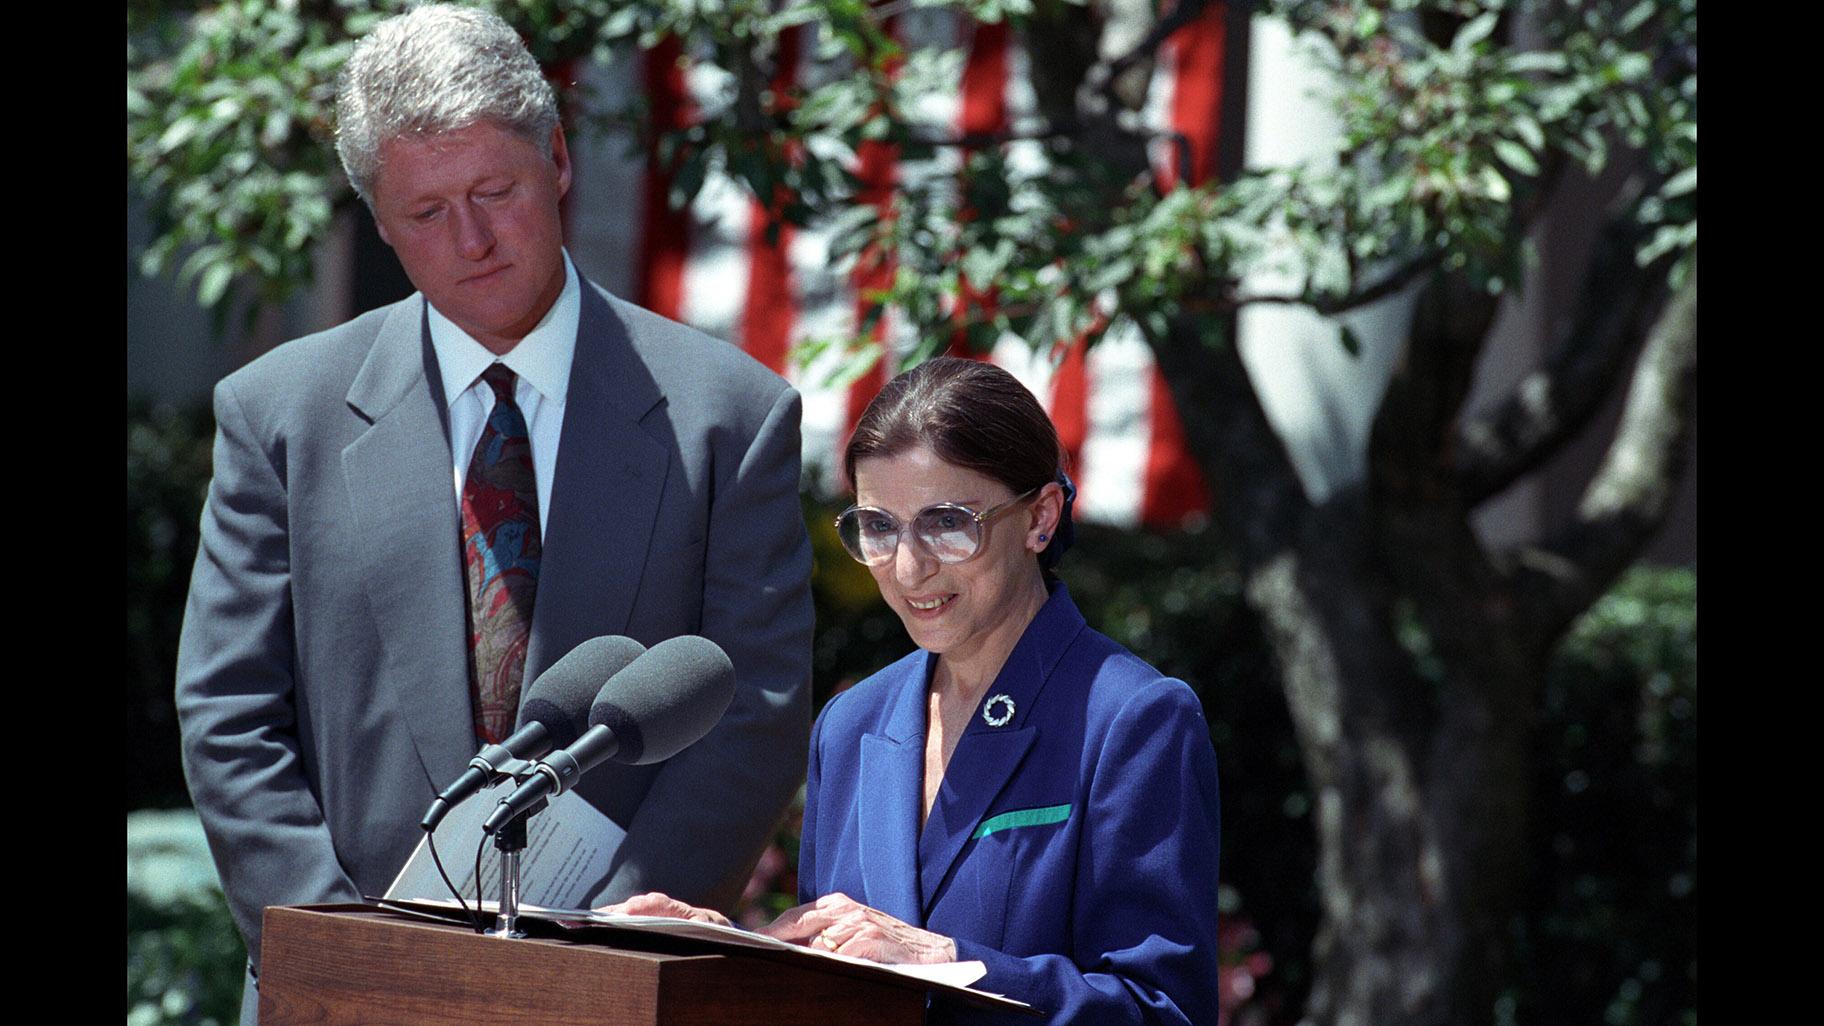 President Bill Clinton looks on as Ruth Bader Ginsburg speaks after the announcement of her nomination to the Supreme Court in June 1993. (Sharon Farmer / National Archives and Records Administration)